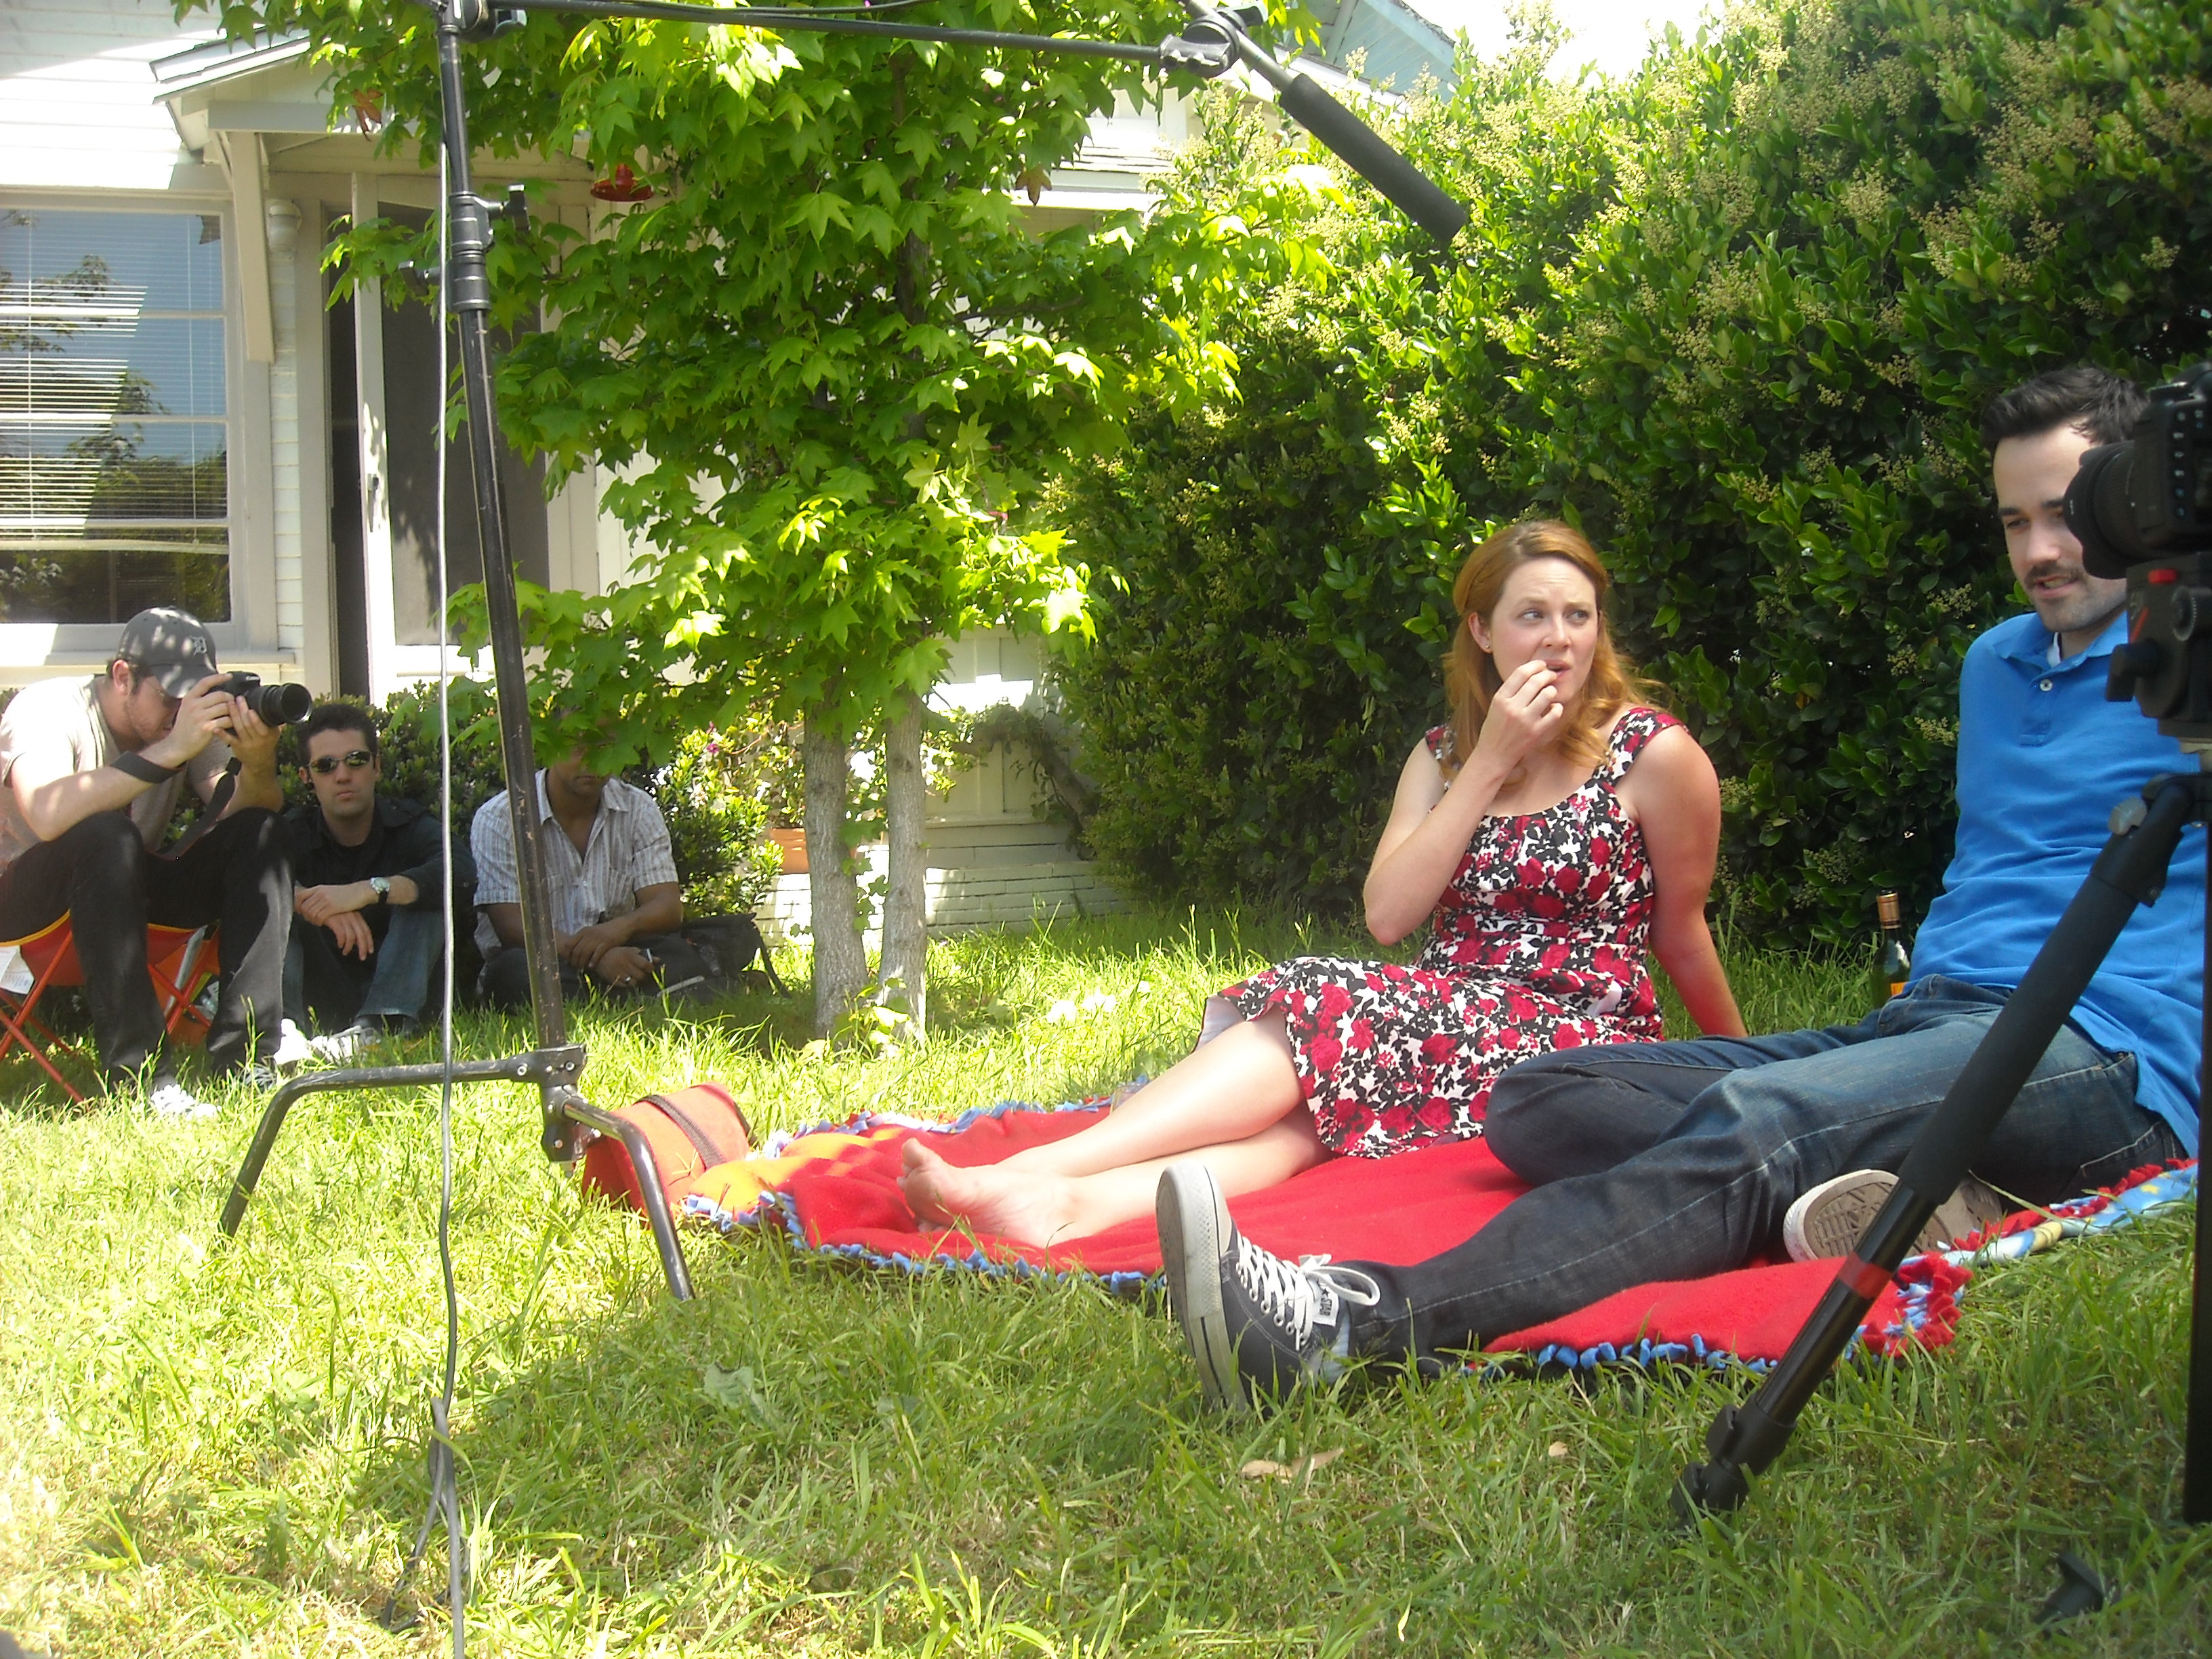 Elizabeth Mihelich and Andy Ostrof Film a scene from the romantic comedy 